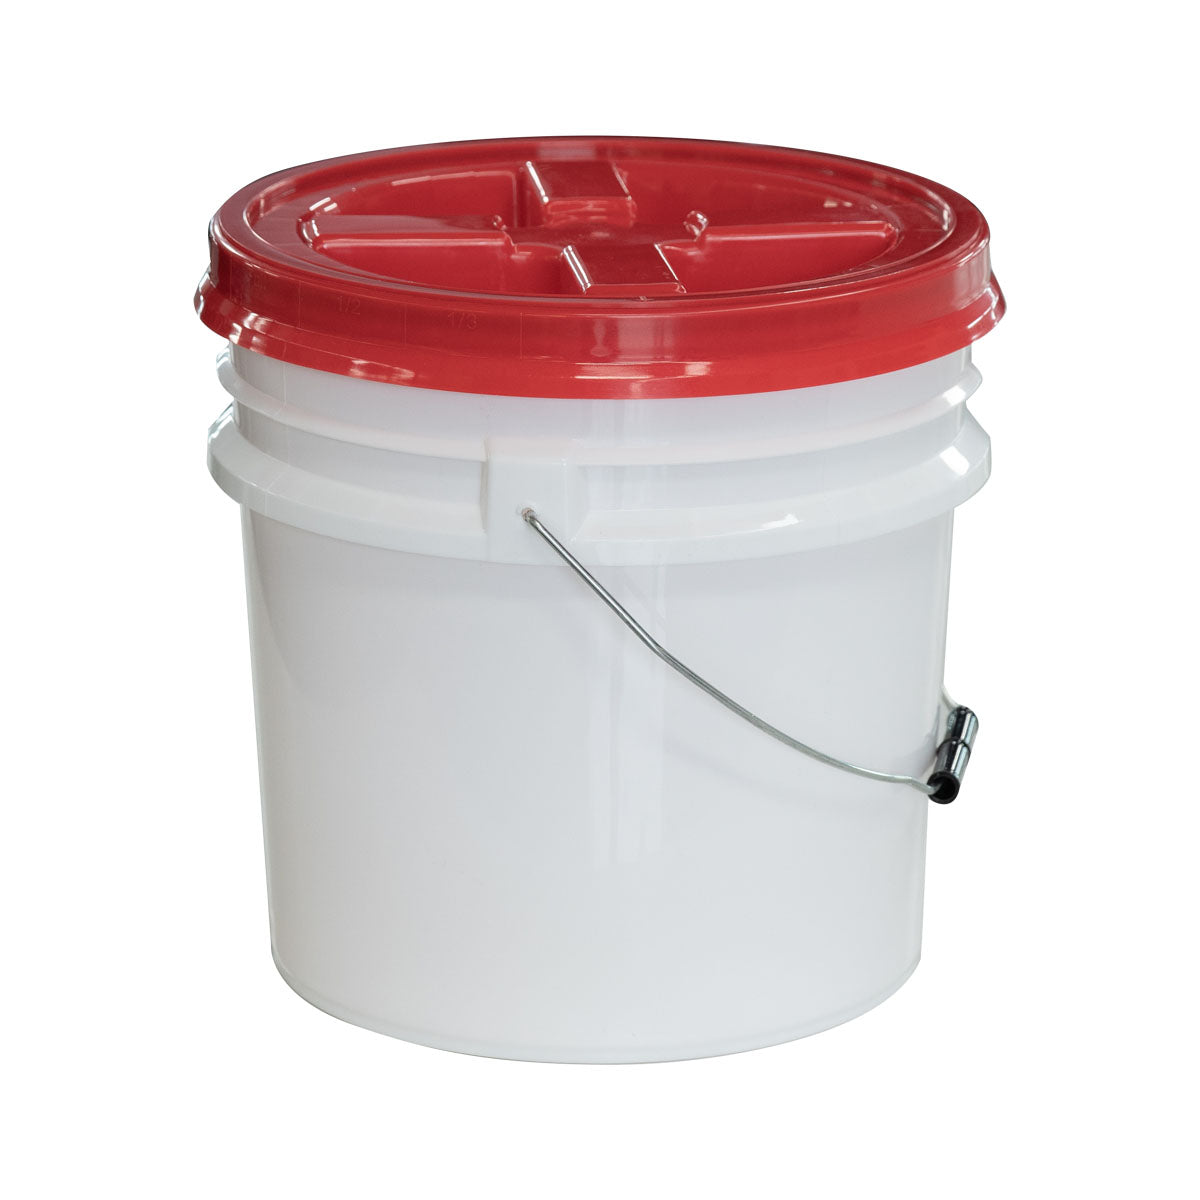 Car Wash Bucket With Gamma Seal Lid - Red 15L